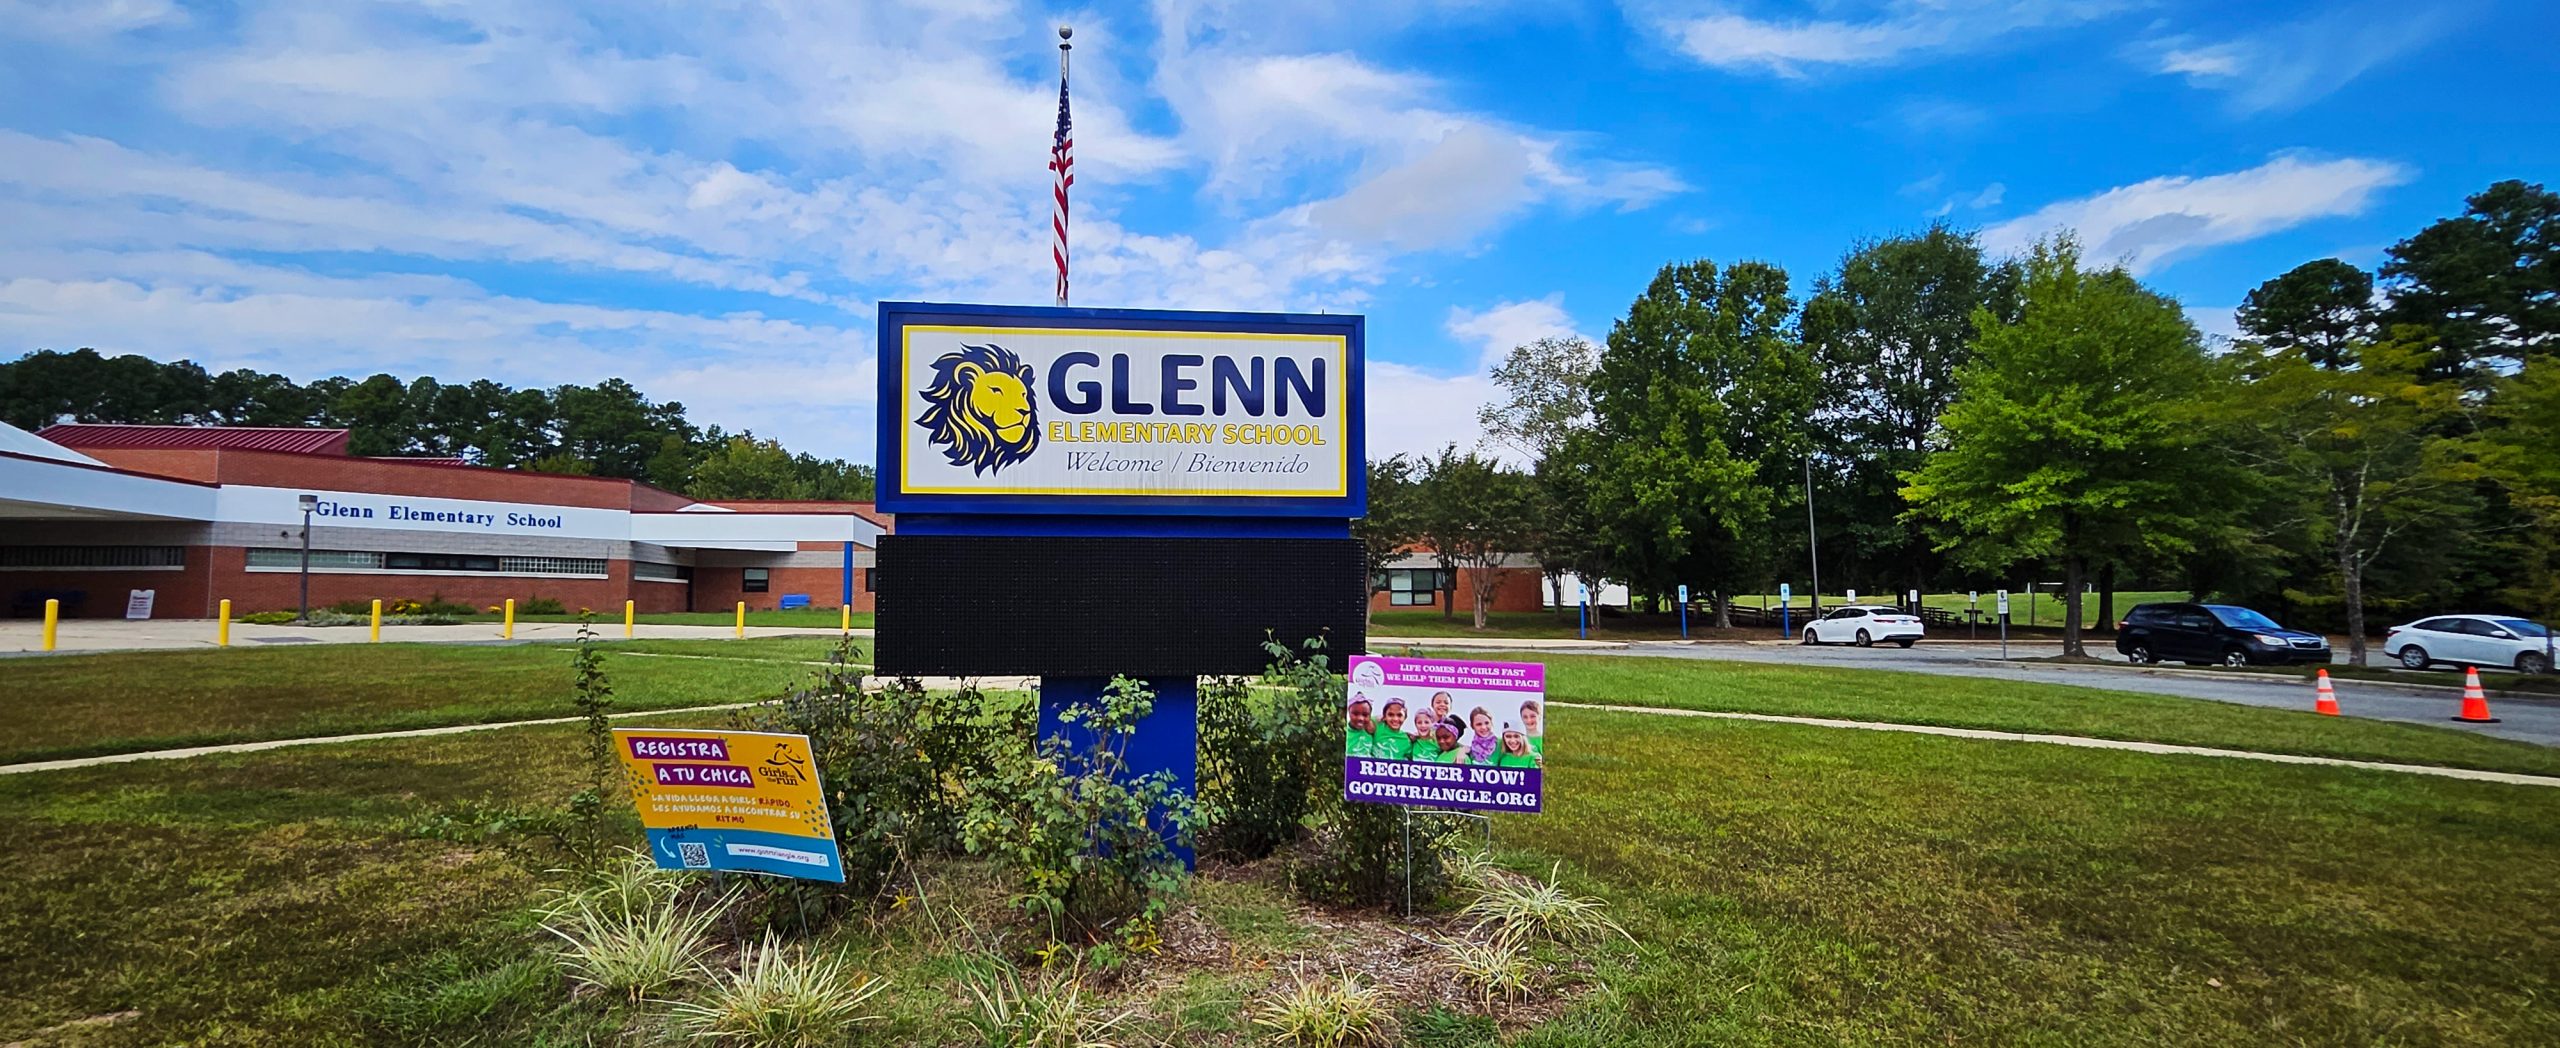 Wide shot of the front view of Glenn Elementary School